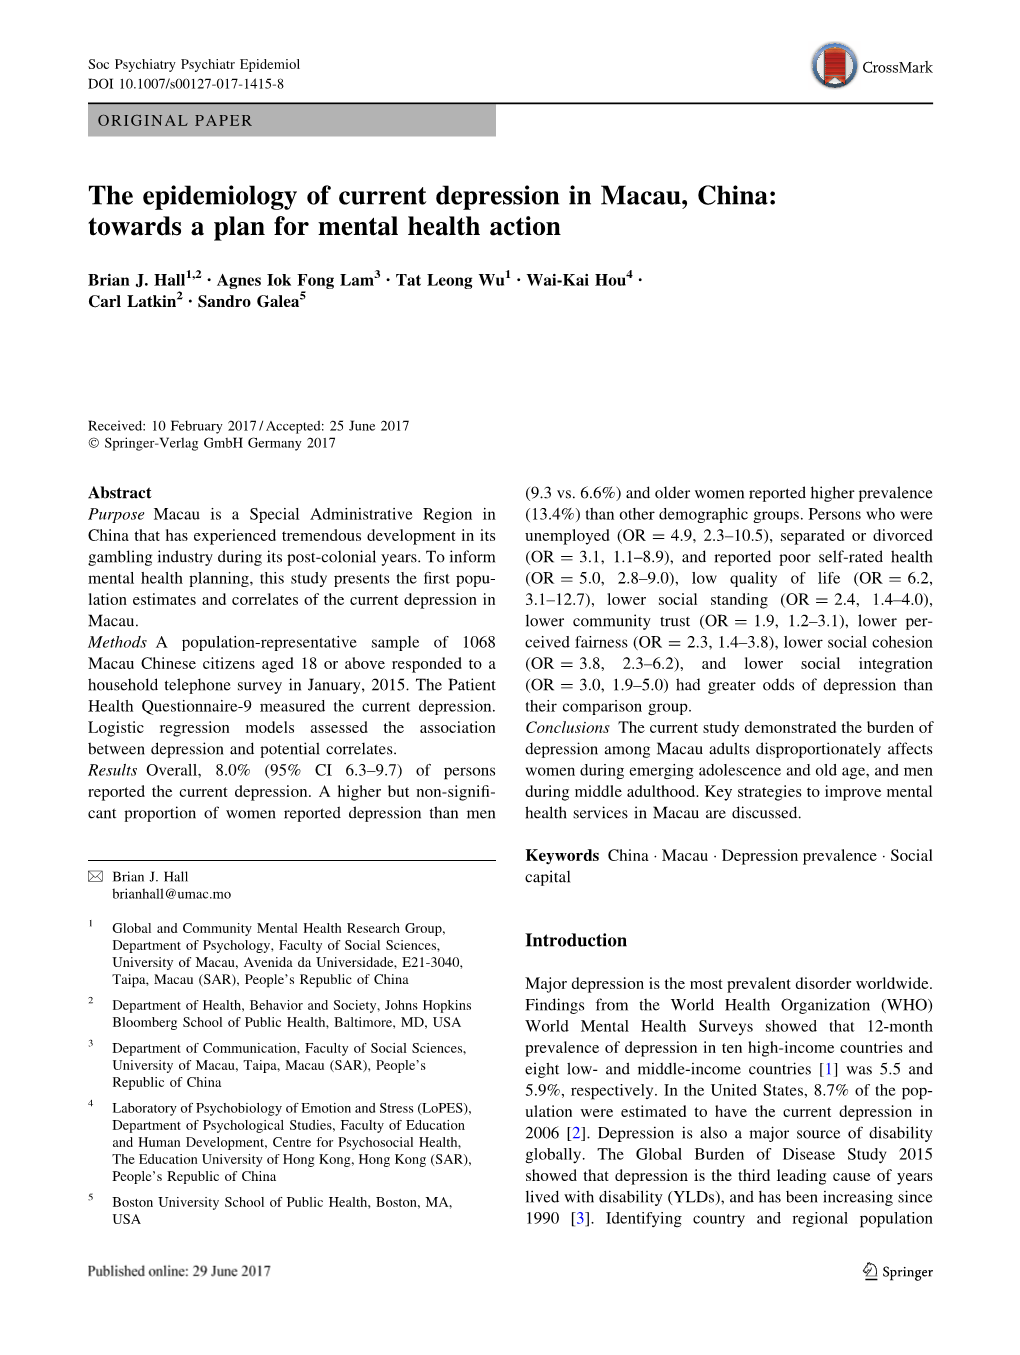 The Epidemiology of Current Depression in Macau, China: Towards a Plan for Mental Health Action